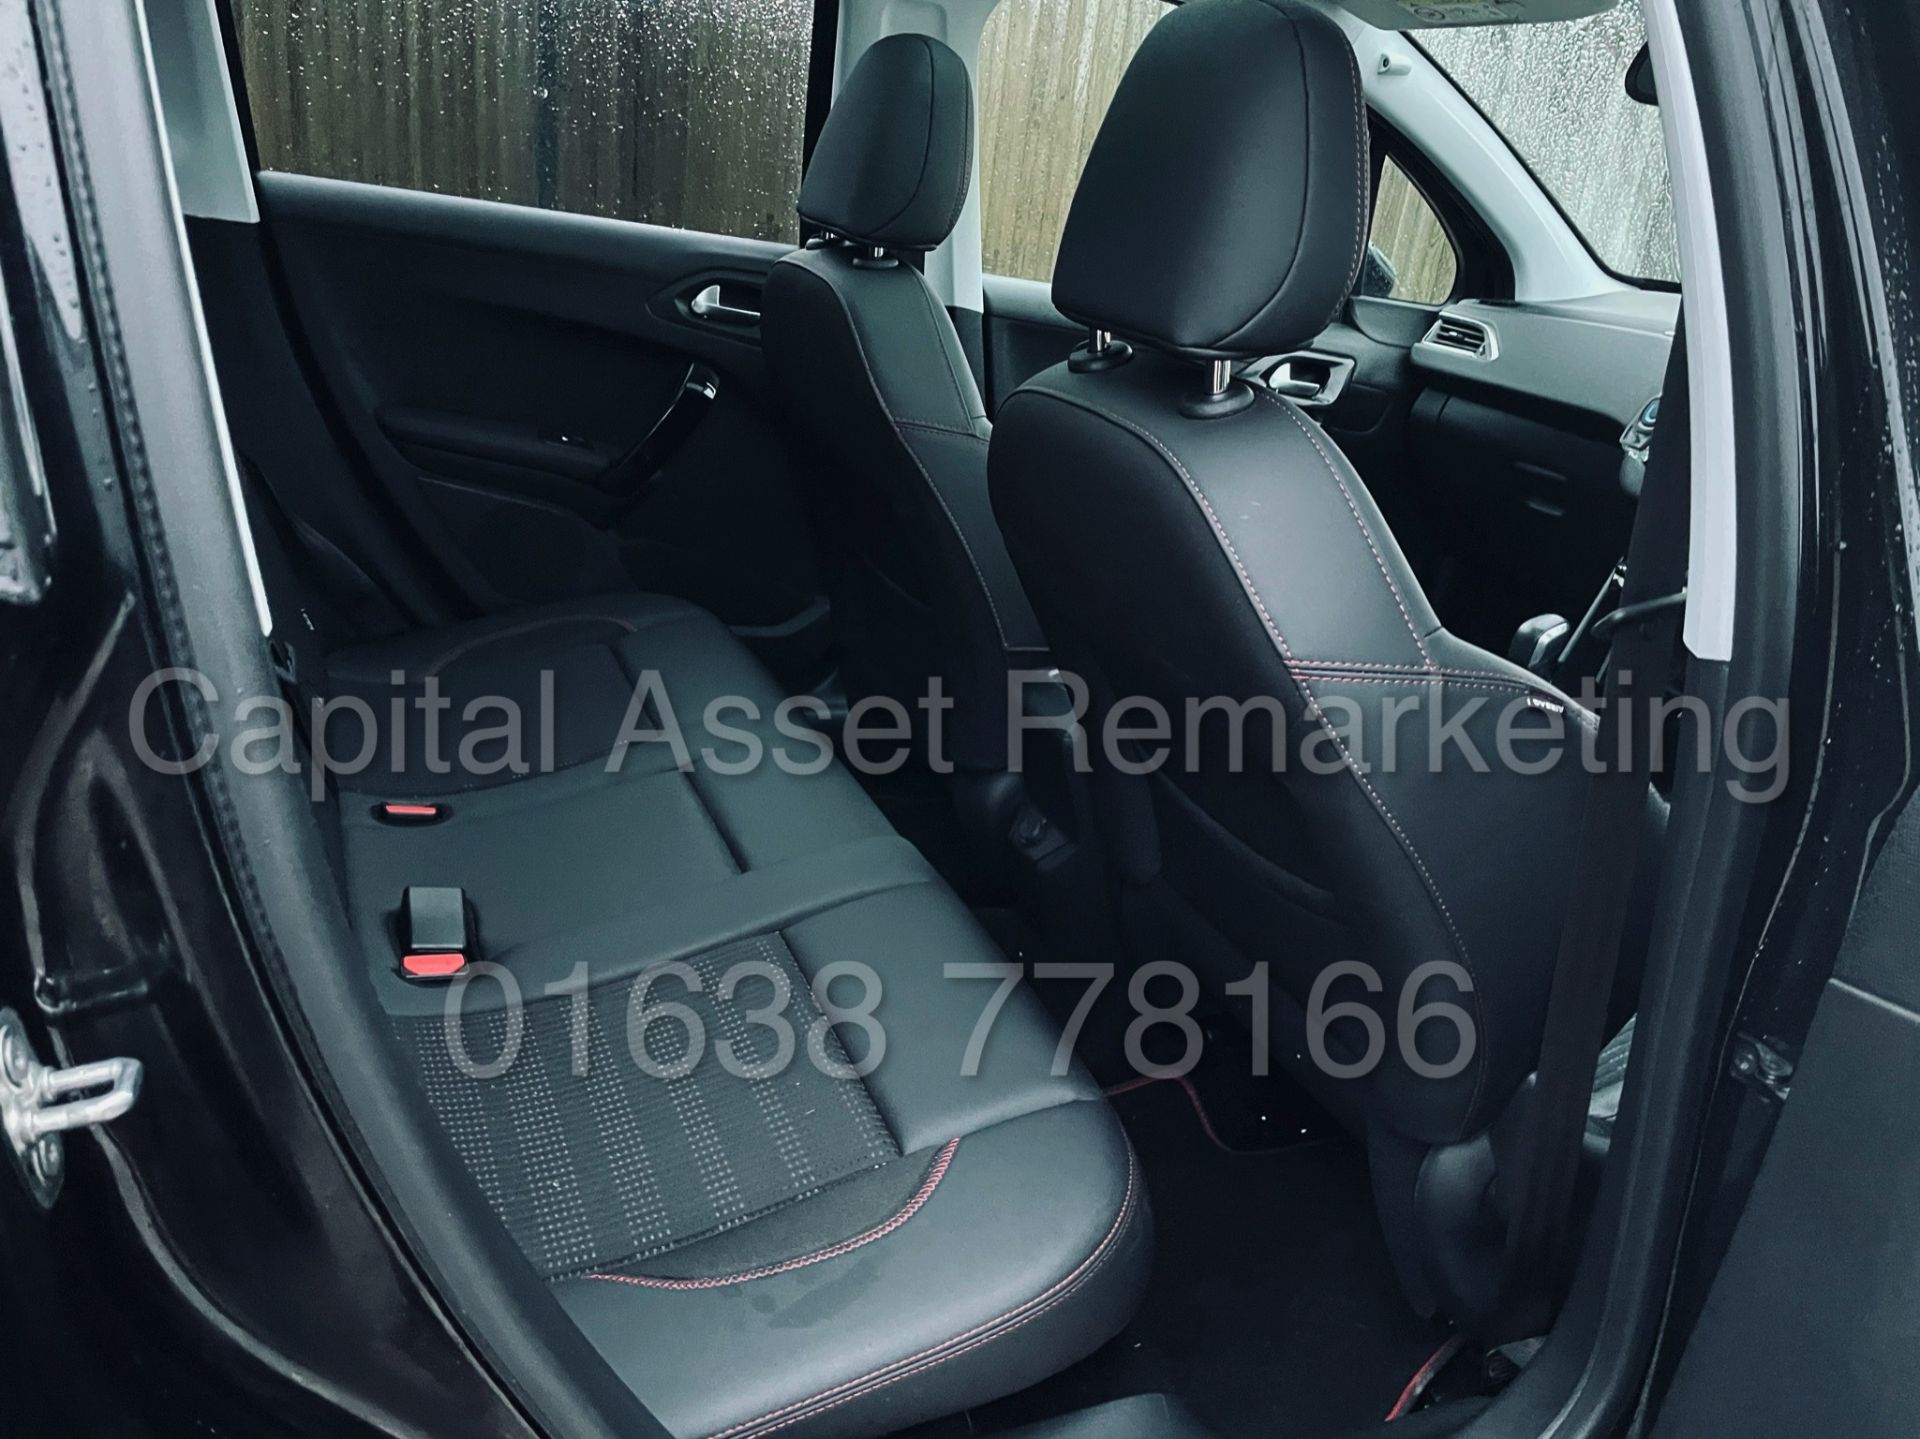 PEUGEOT 2008 *GT LINE* SUV / MPV (2019 - EURO 6) '1.5 BLUE HDI' *SAT NAV - PAN ROOF' *LOW MILES* - Image 25 of 46